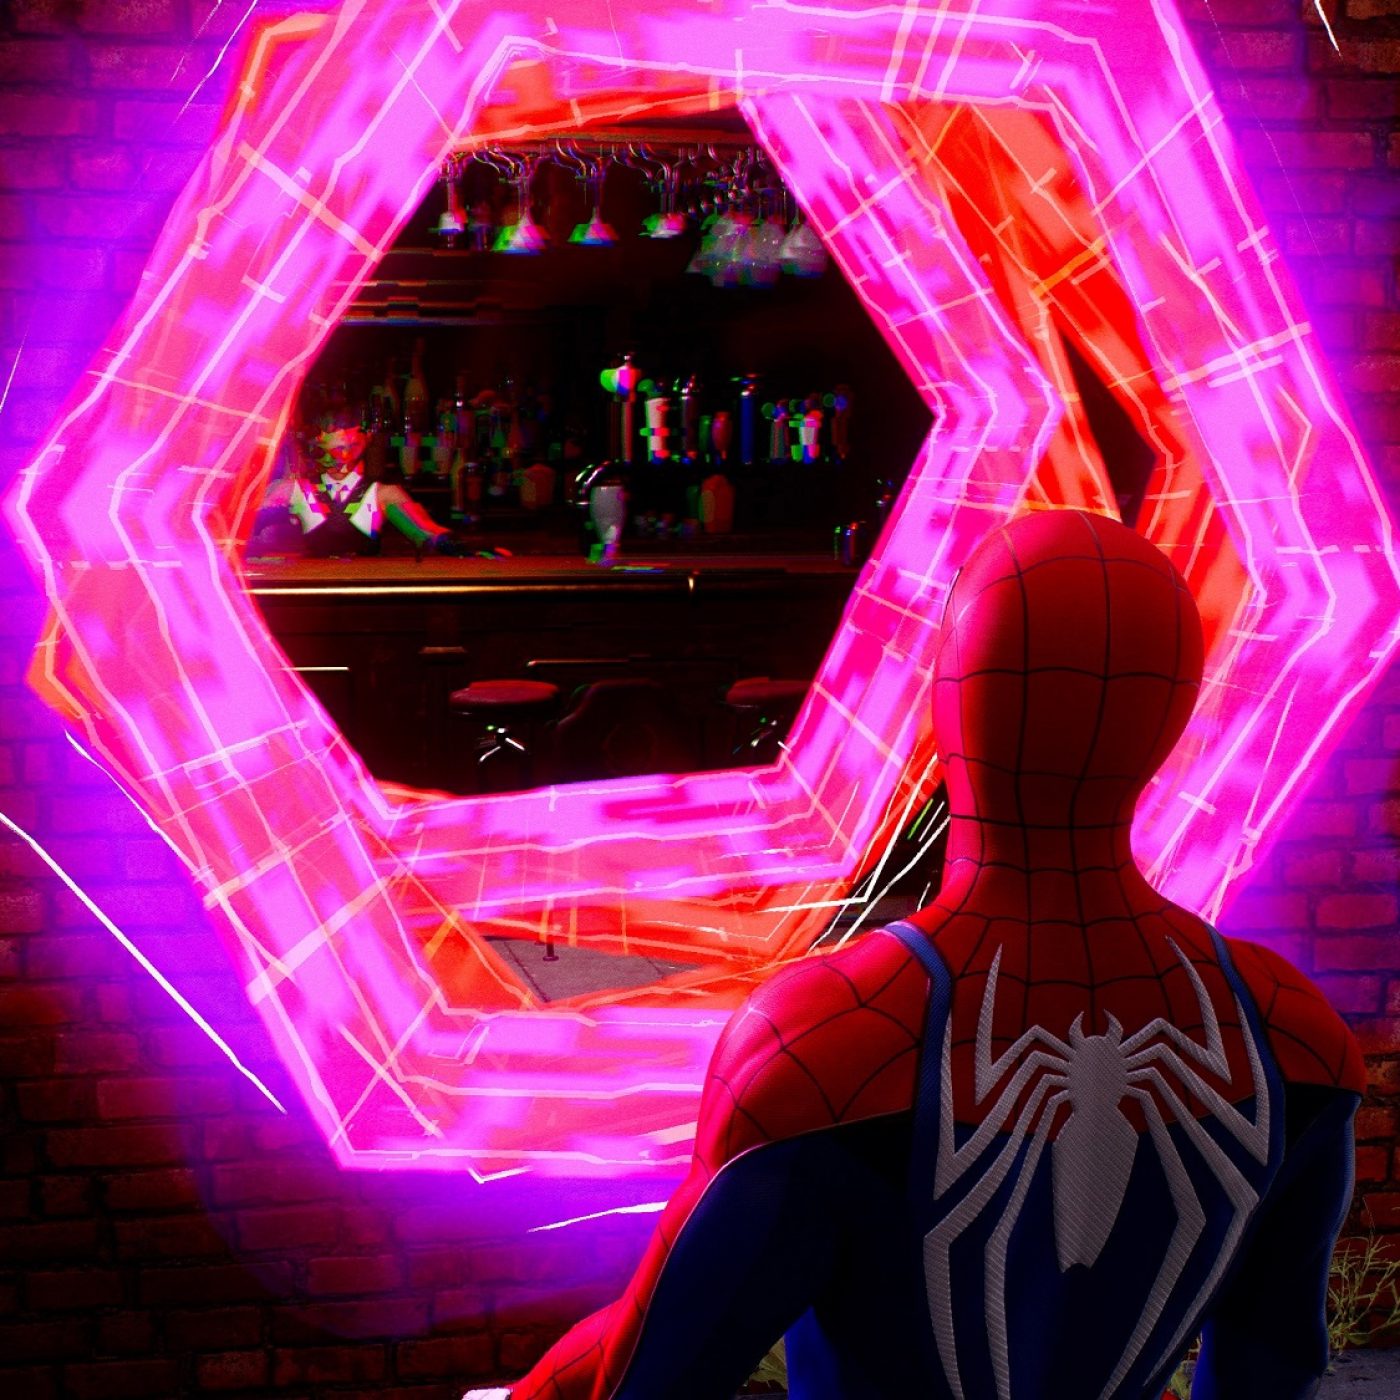 Spider-Man 2 Creative Director Teases a Third Game - Insider Gaming